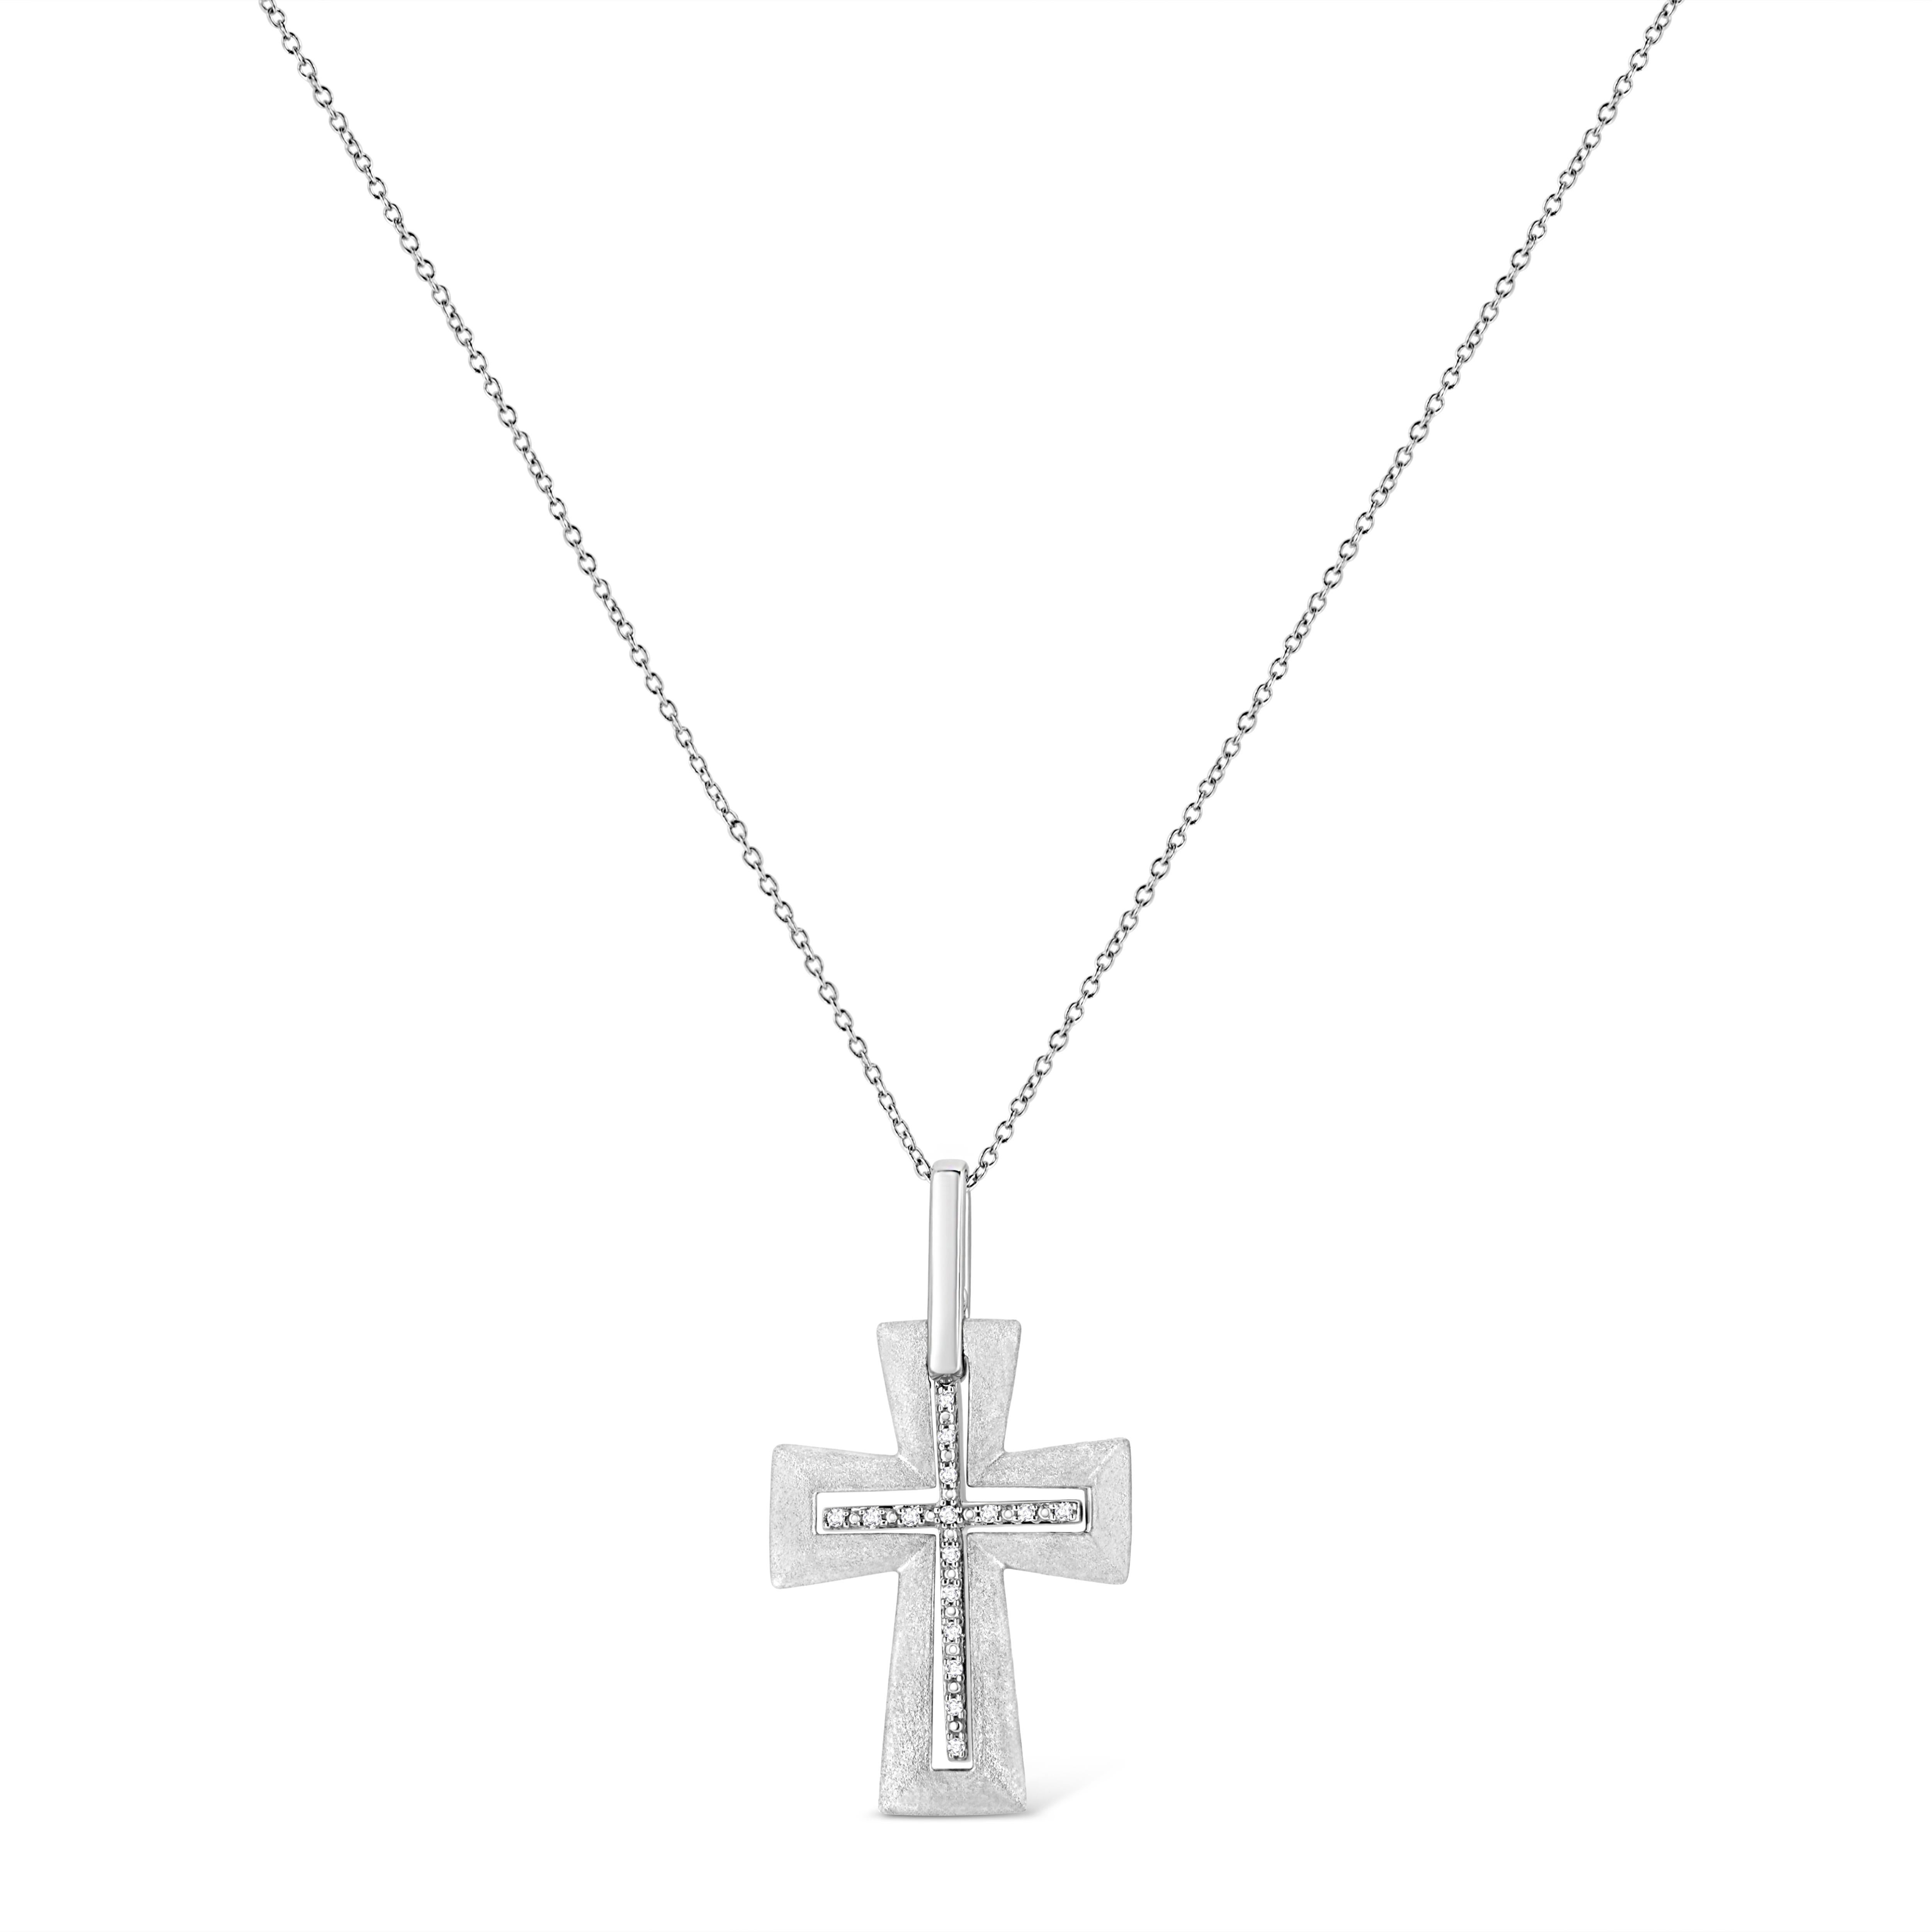 Chain Men's Real Solid 925 Silver Cross Pendant Prong Set Crucifix Necklace W 